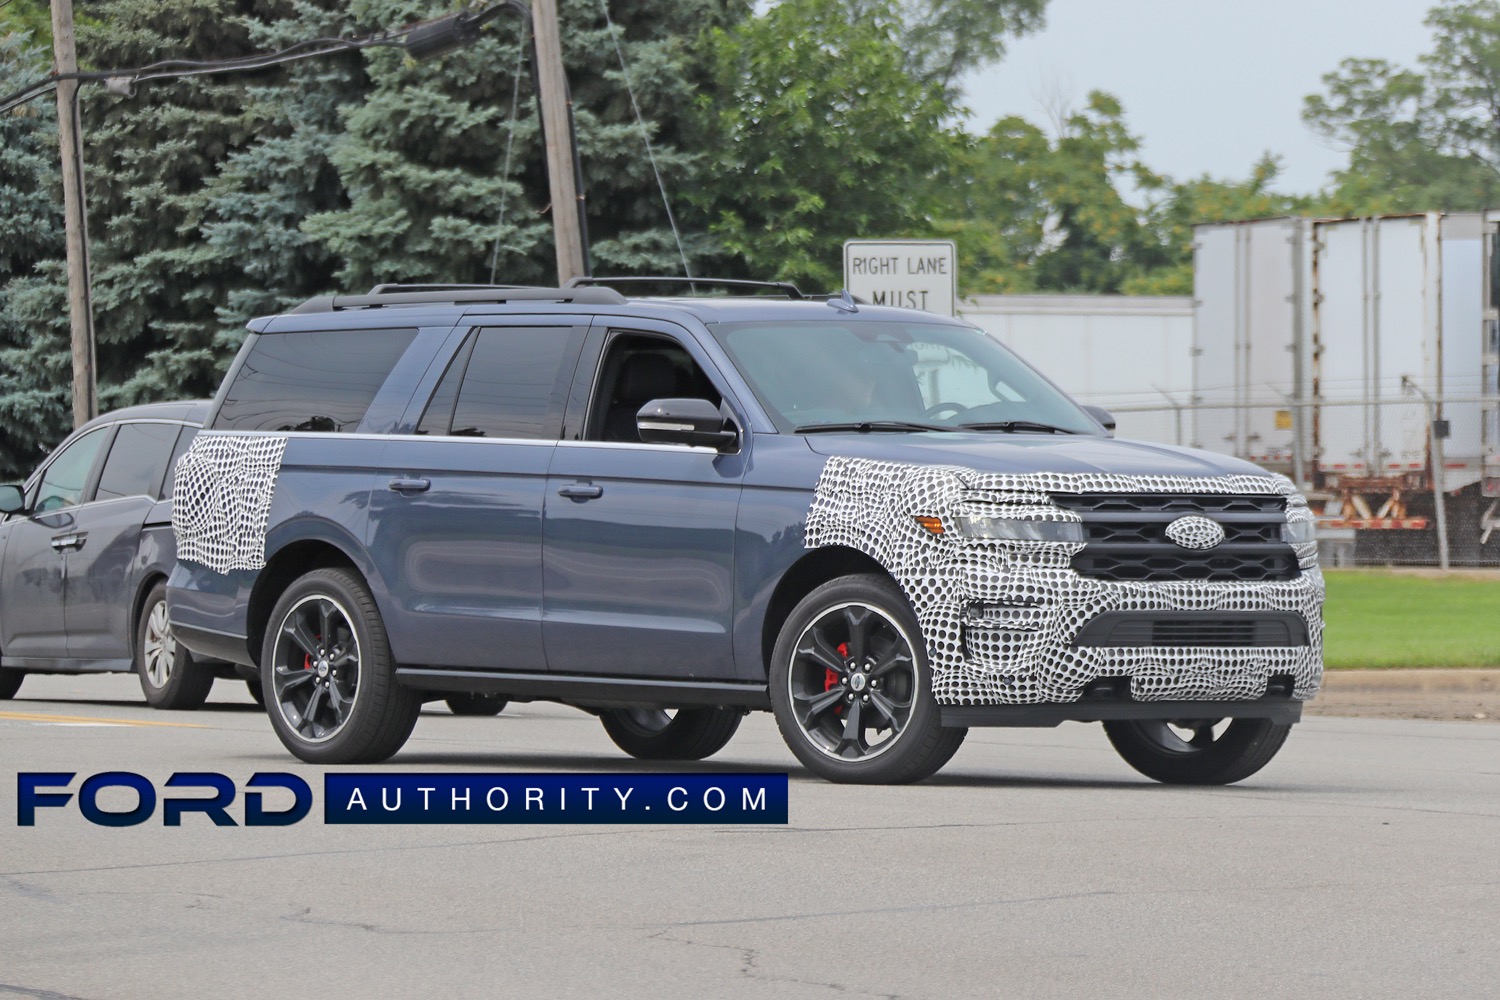 New 2022 Ford Expedition Photos Reveal Exterior Styling Updates